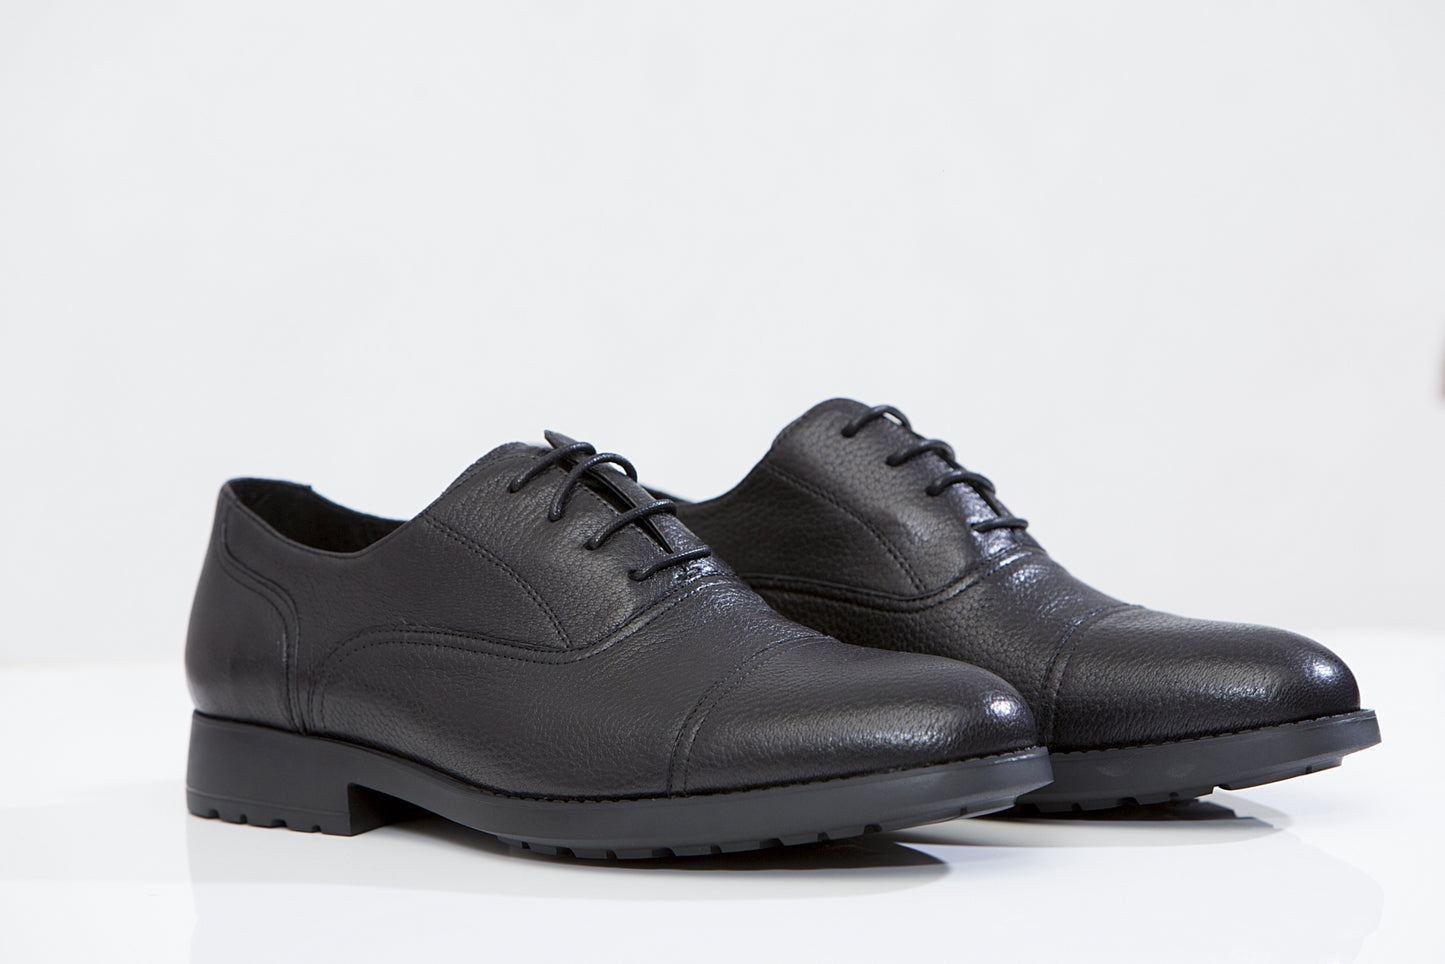 MARIO C. leather oxford shoes